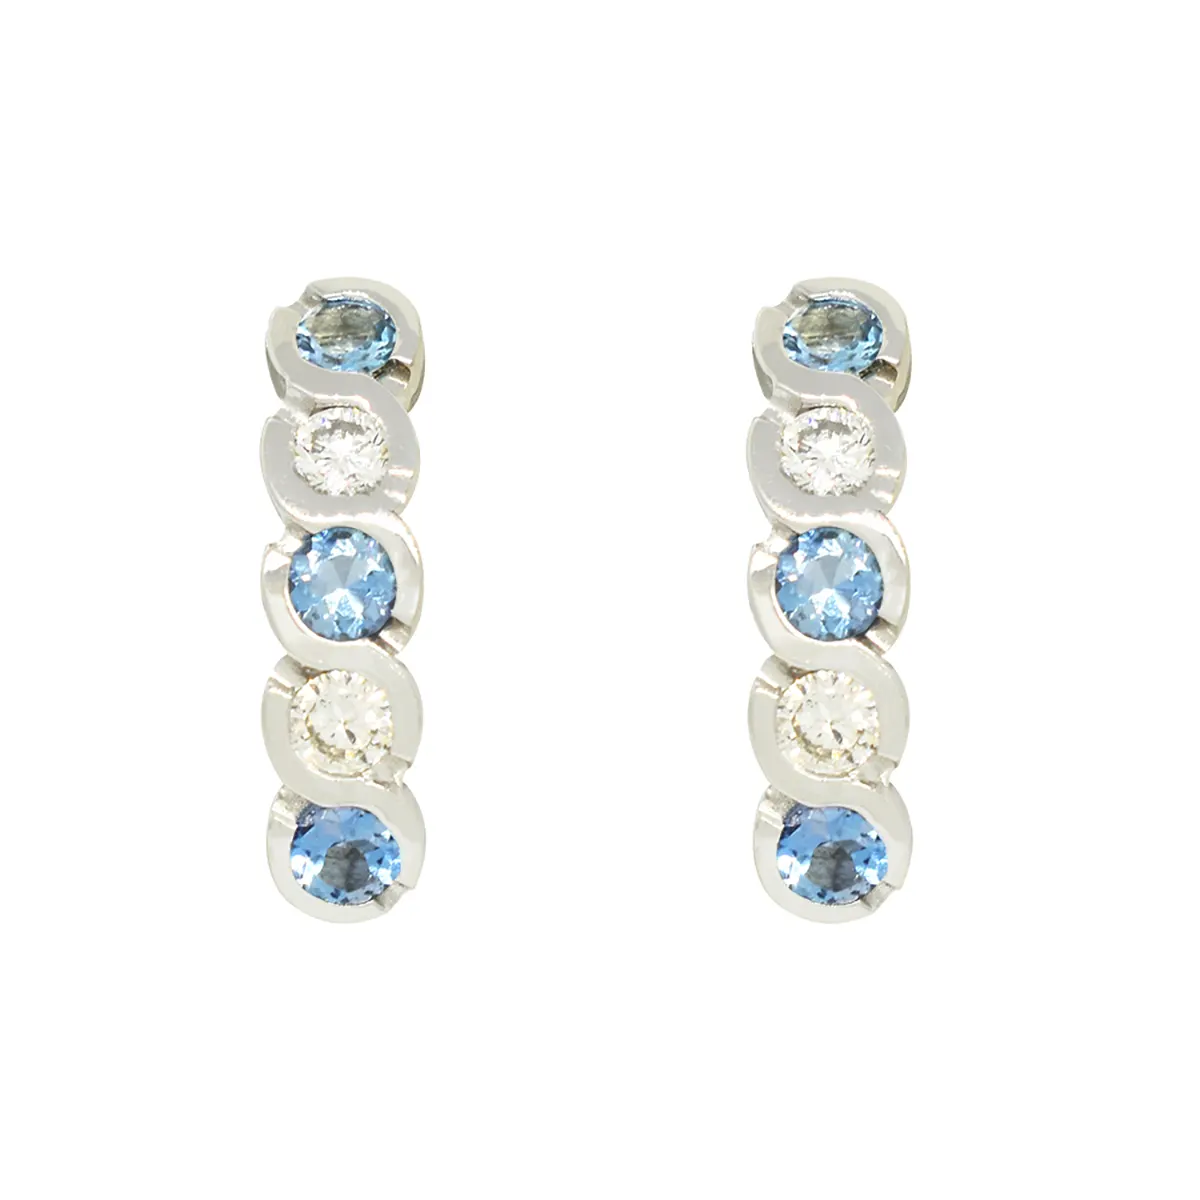 drop-earrings-in-18k-white-gold-with-diamonds-and-aquamarines-in-bezel-setting